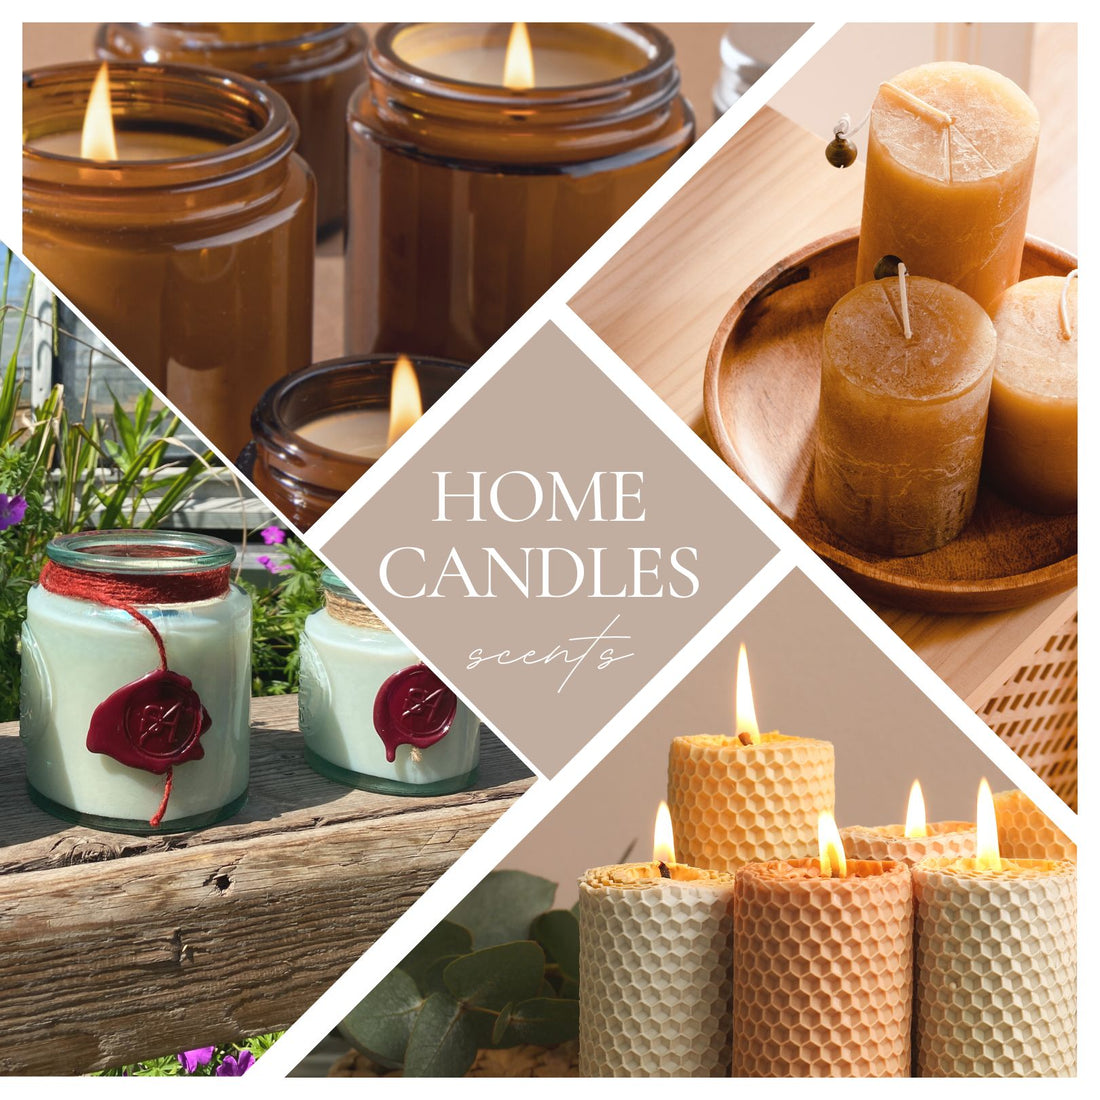 How to Choose the Right Scented Soy Candle for Your Home - STANZA Artigiana